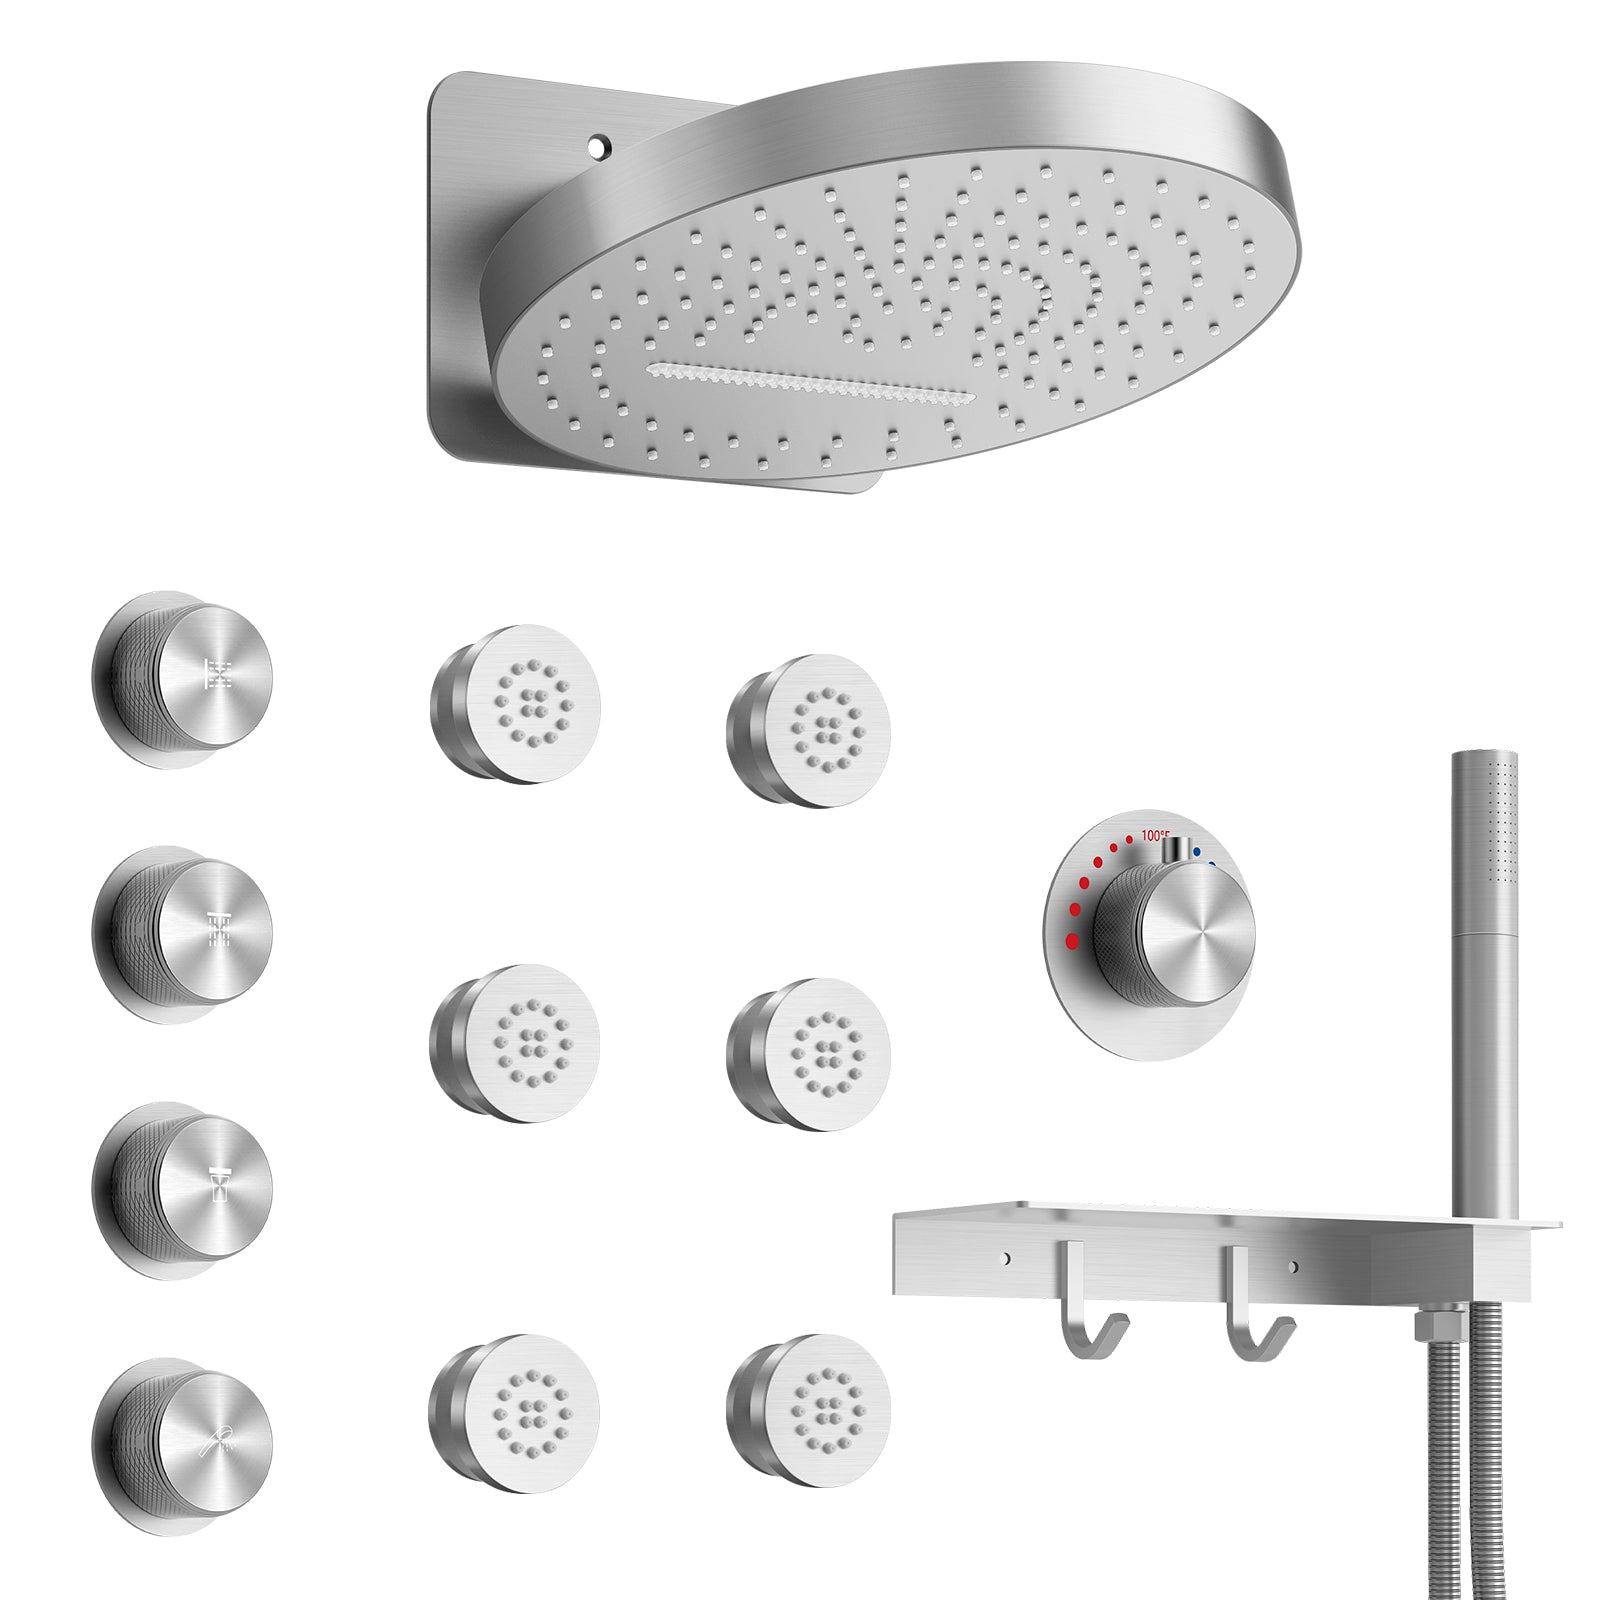 M6274NI 12" High-Pressure Wall Mount Rainfall Complete Shower System with Rough in-Valve